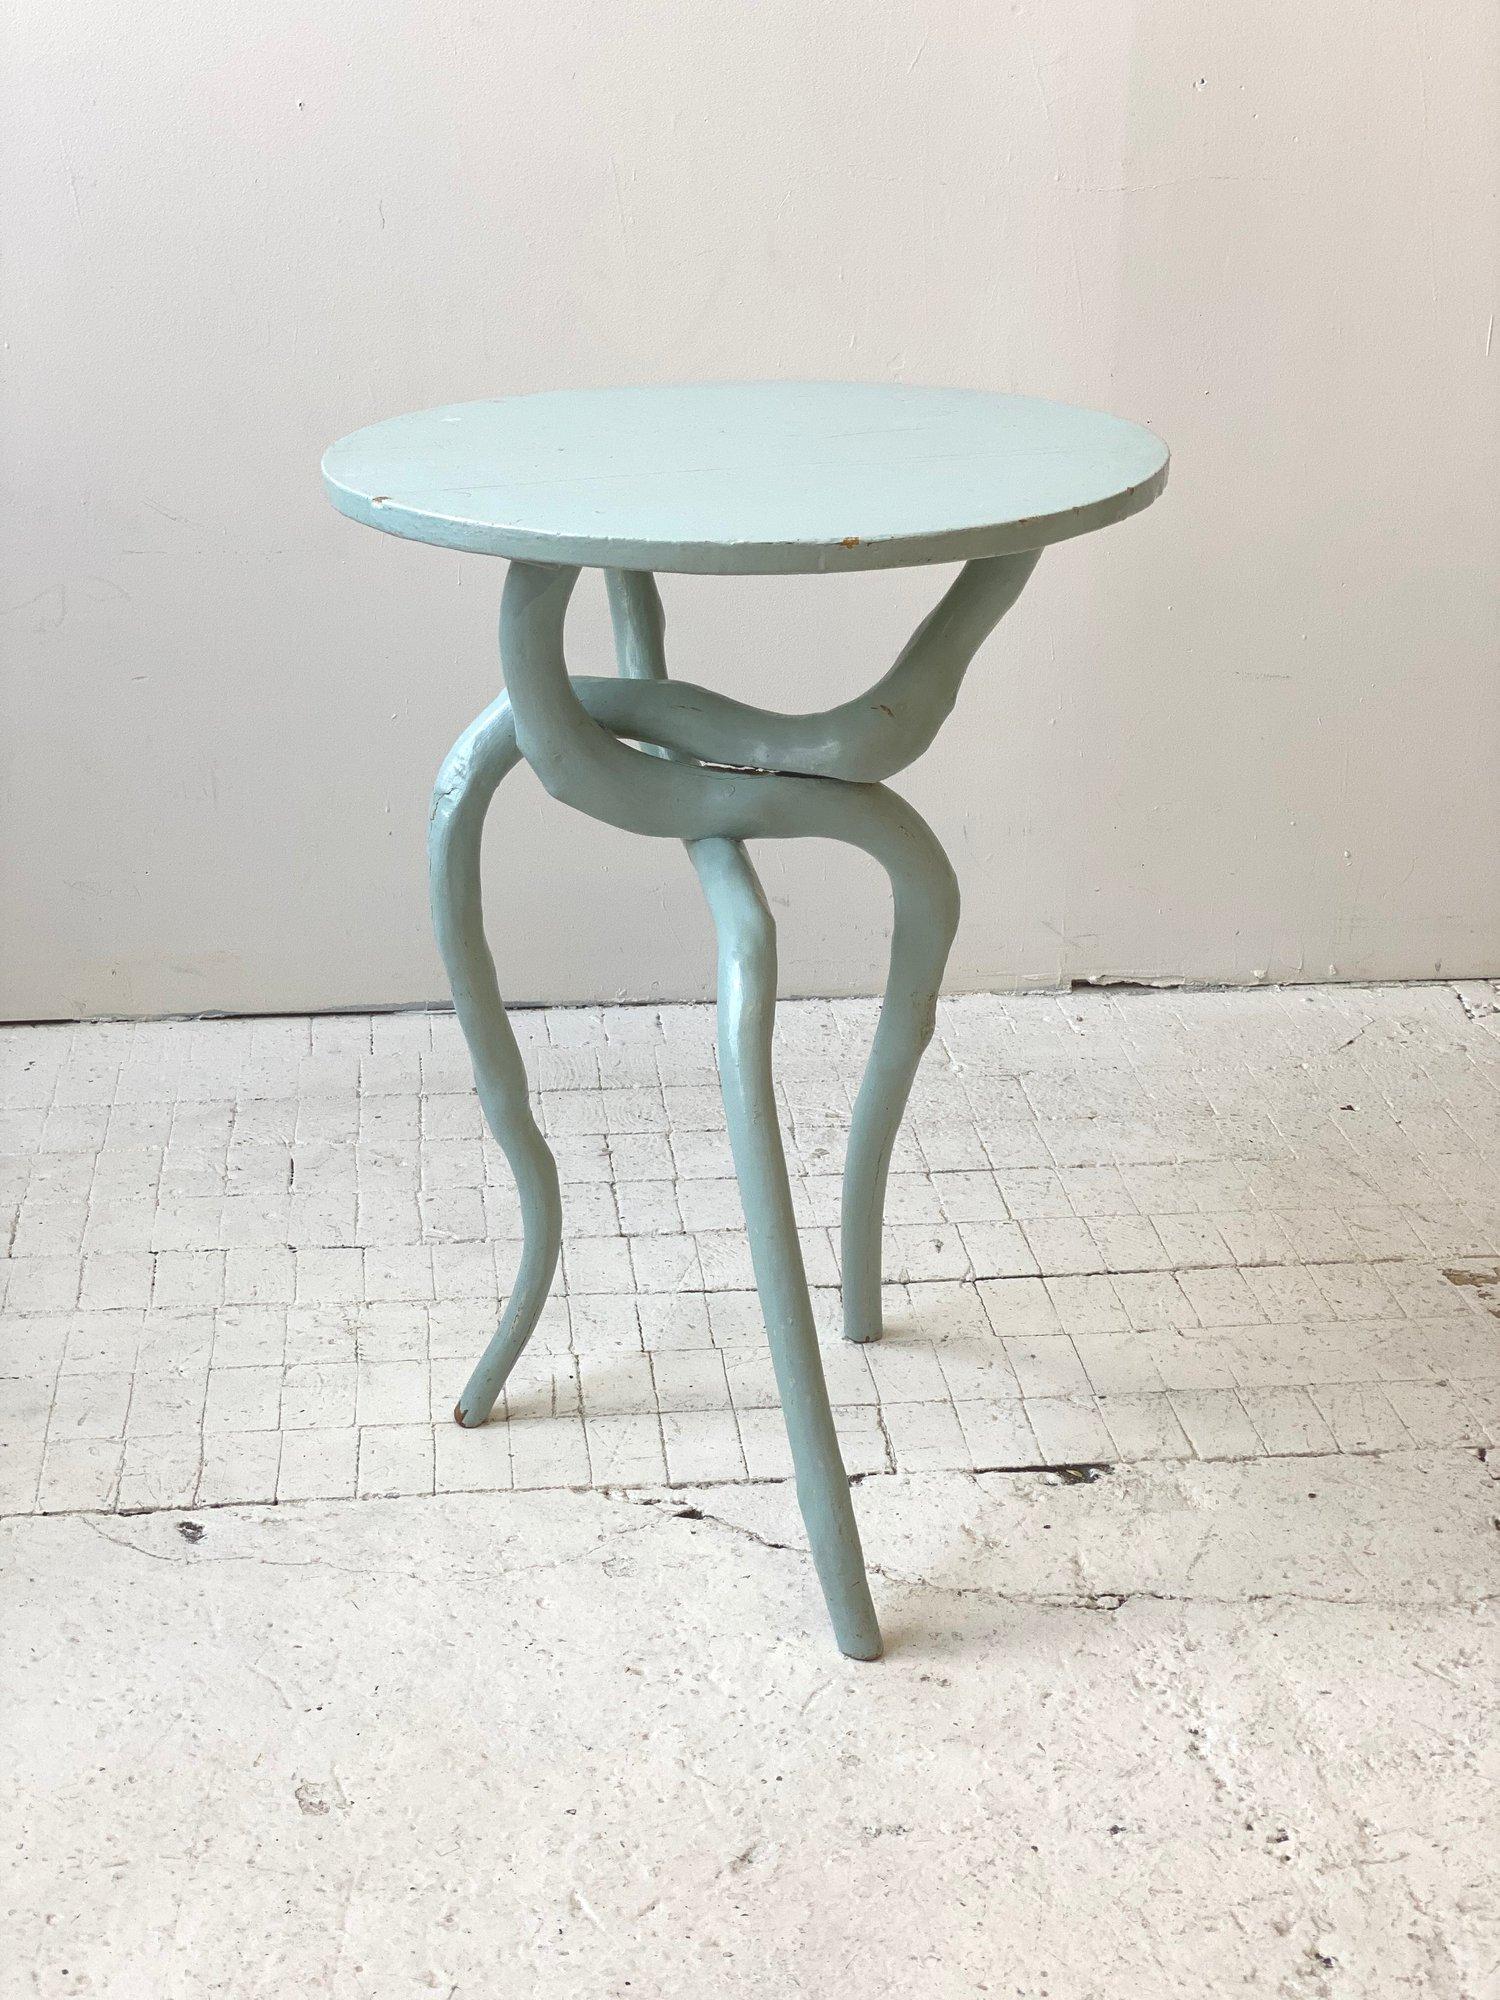 Rare Antique Sculptural Folk Art Powder Blue Painted Twig Table, Circa Late 19th Century. Constructed from a solid painted pine top with elongated naturally formed wood branch legs. Each leg is arranged to support the top, crossing the leg below and